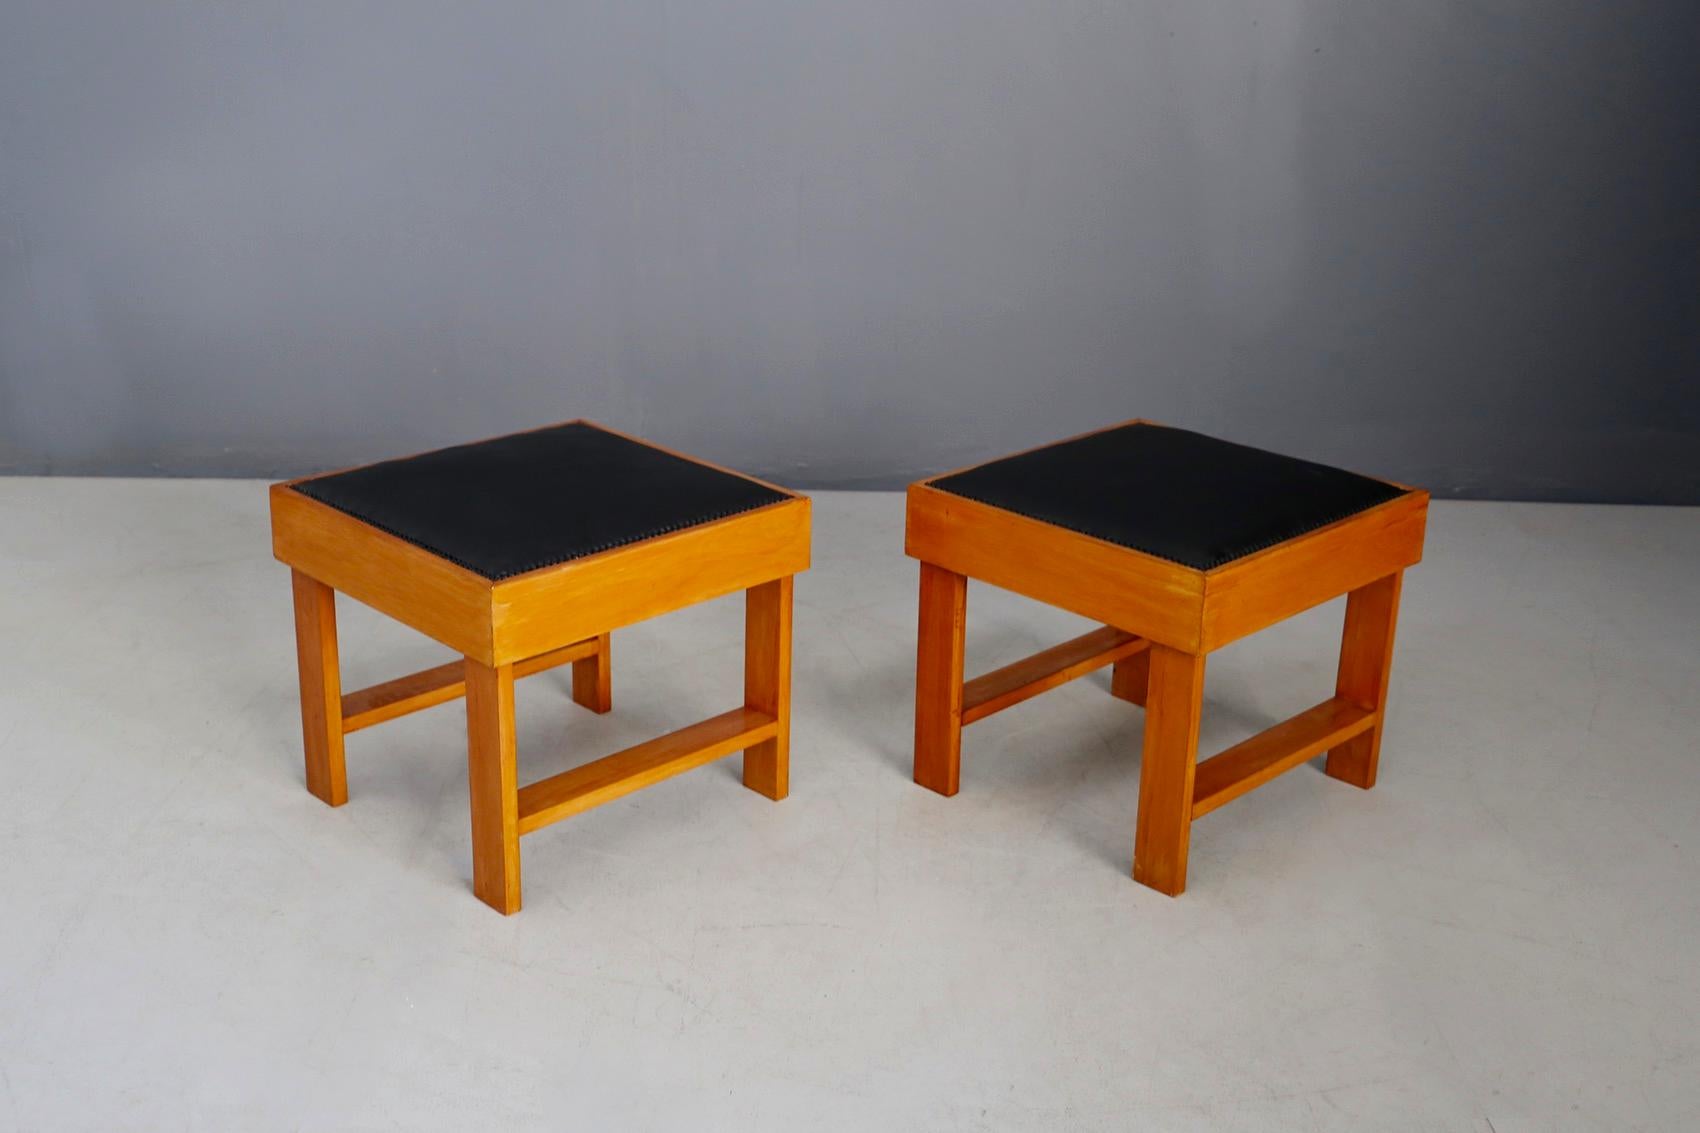 Pair of stools designed by BBPR studio in the 1930s. Studio Bbpr - Gian Luigi Banfi, Ludovico Belgiojoso, Enrico Peressutti And Ernesto Nathan Rogers
The stools have a strictly rigorous and squared line, typical of the rationalist design of the